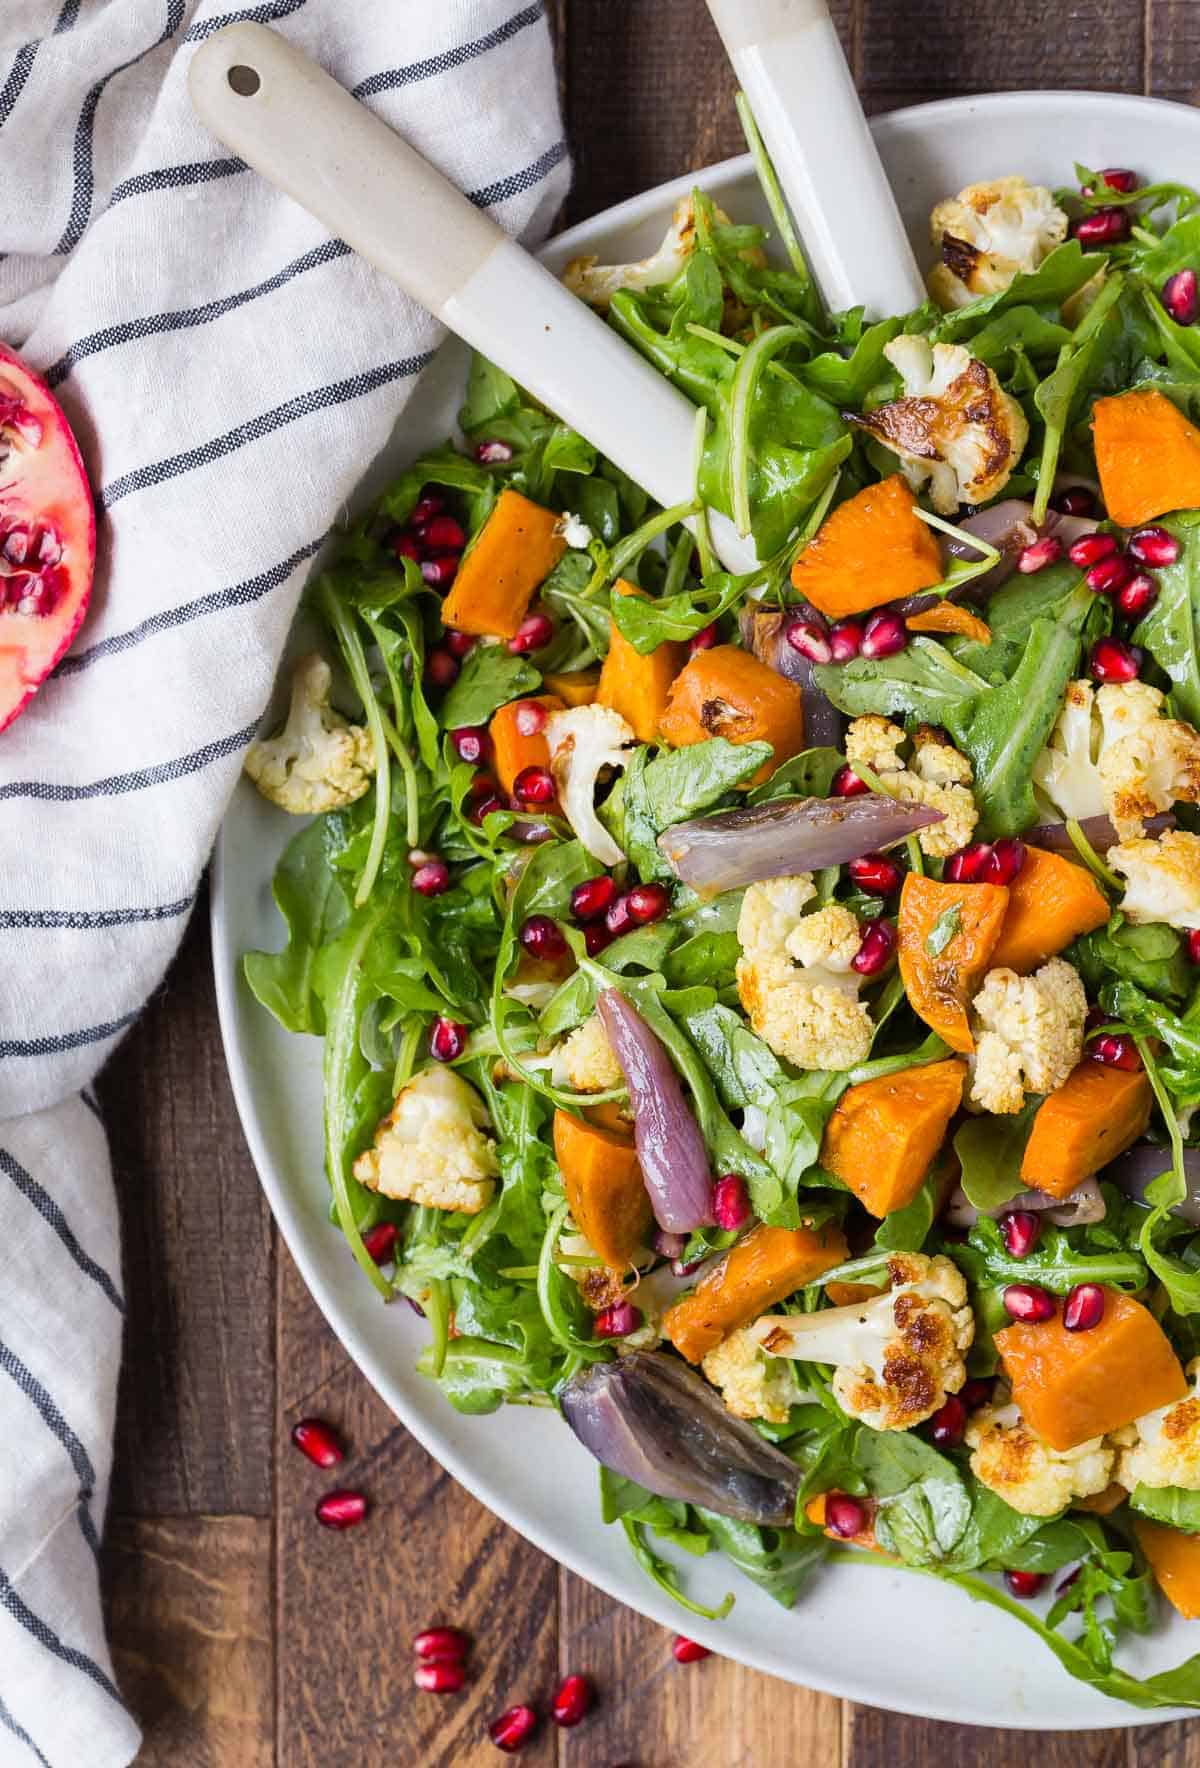 Fall salad with roasted cauliflower and pomegranate arils.